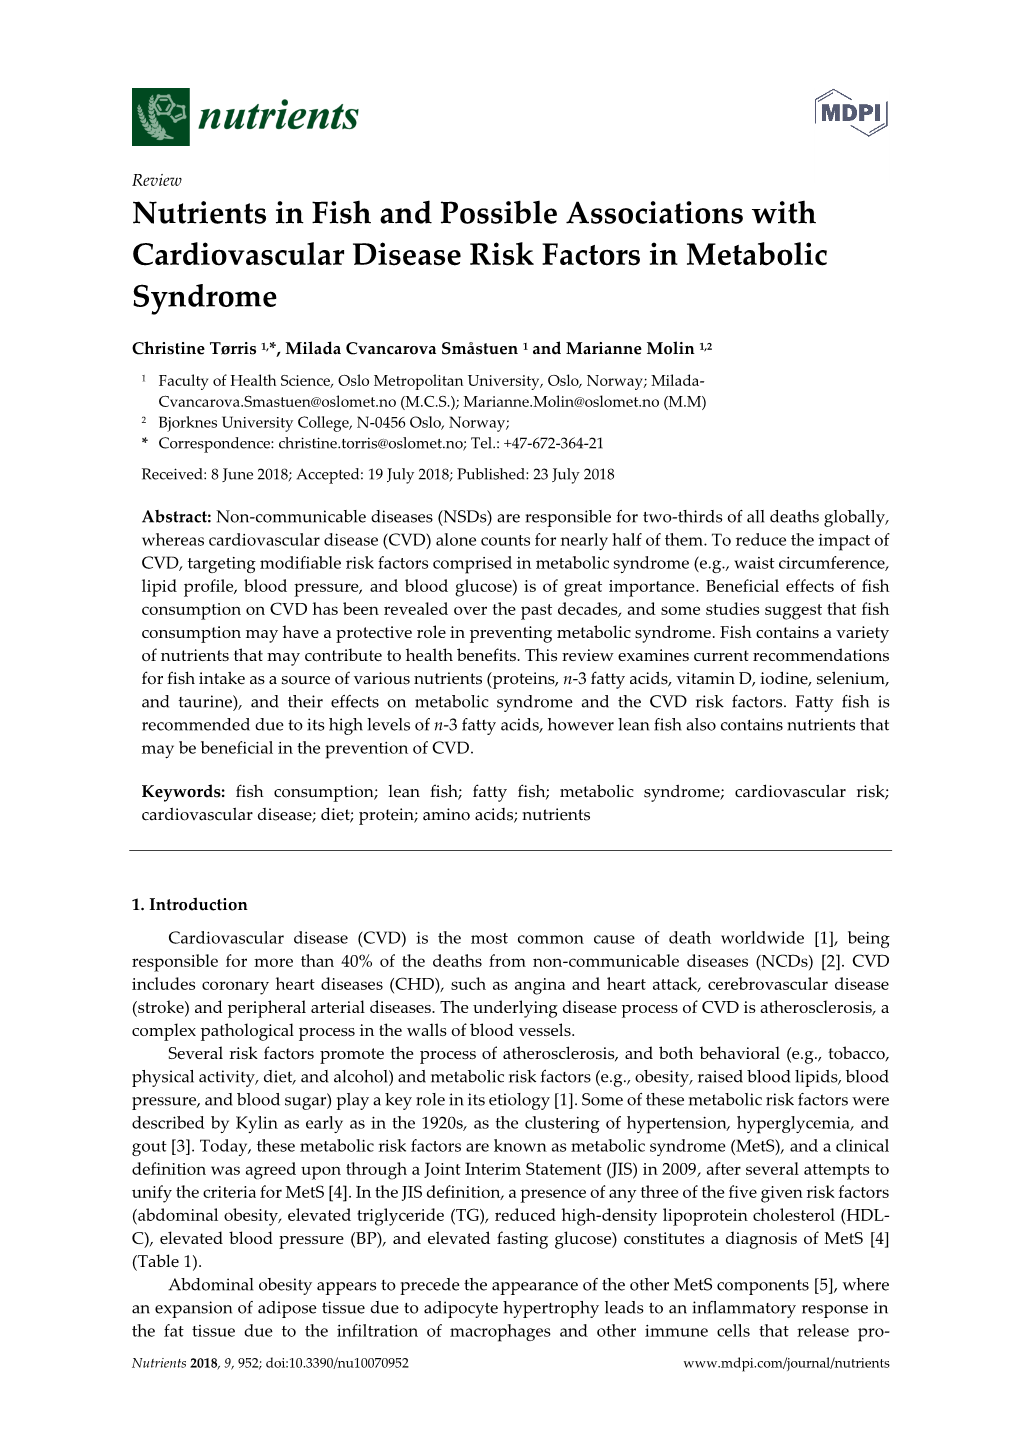 Nutrients in Fish and Possible Associations with Cardiovascular Disease Risk Factors in Metabolic Syndrome